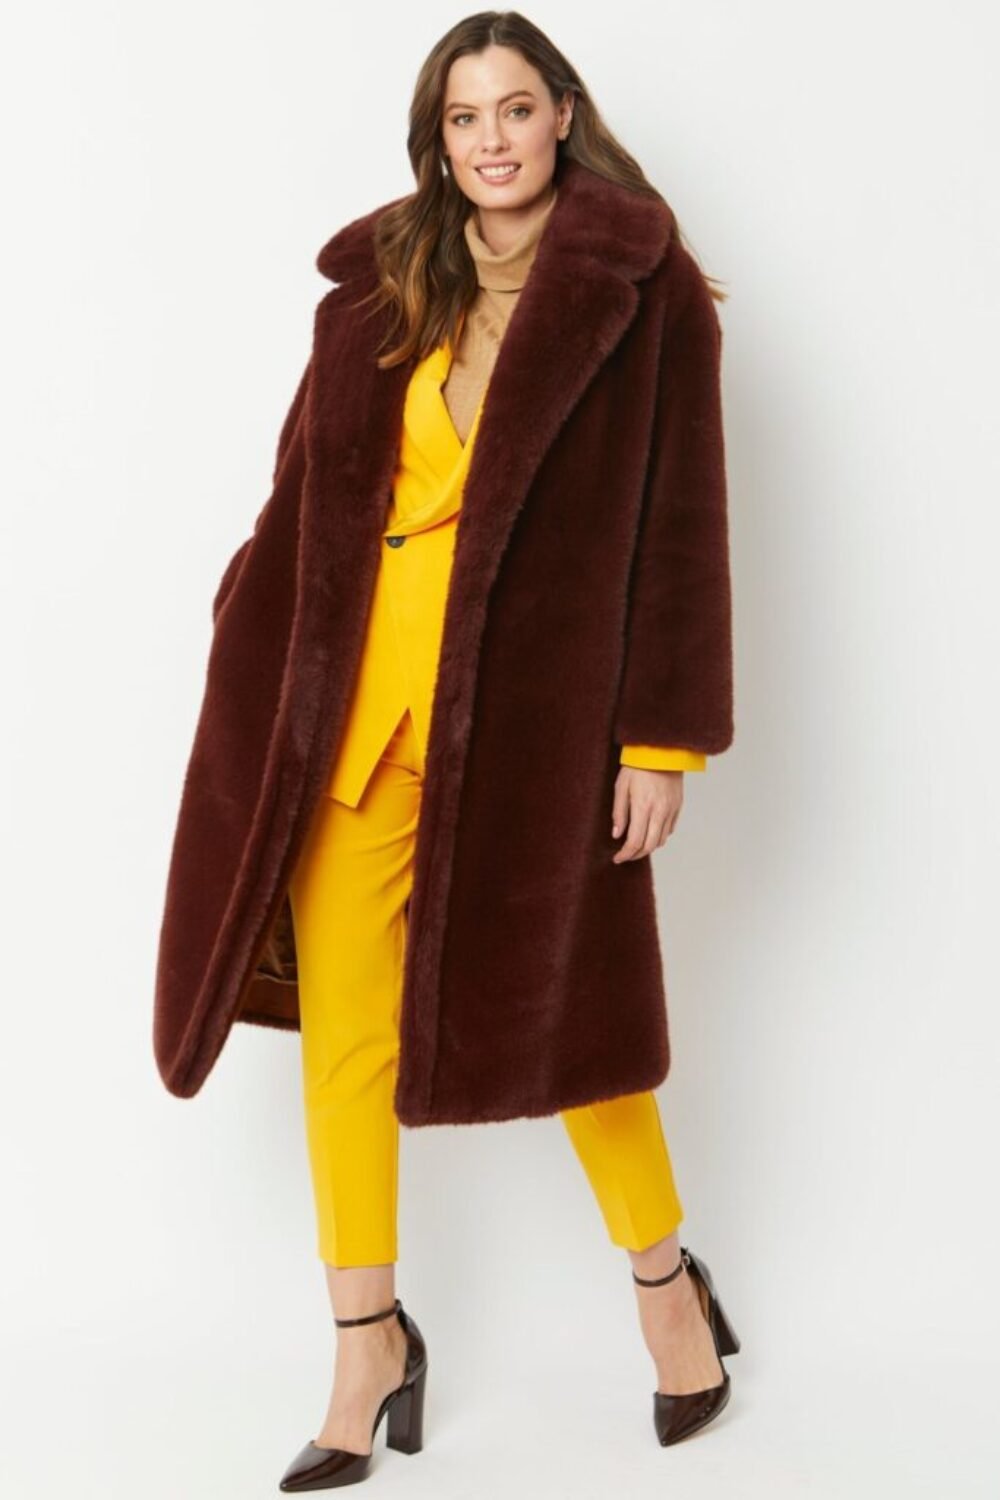 Shop Lux Brown Faux Fur Coat and women's luxury and designer clothes at www.lux-apparel.co.uk